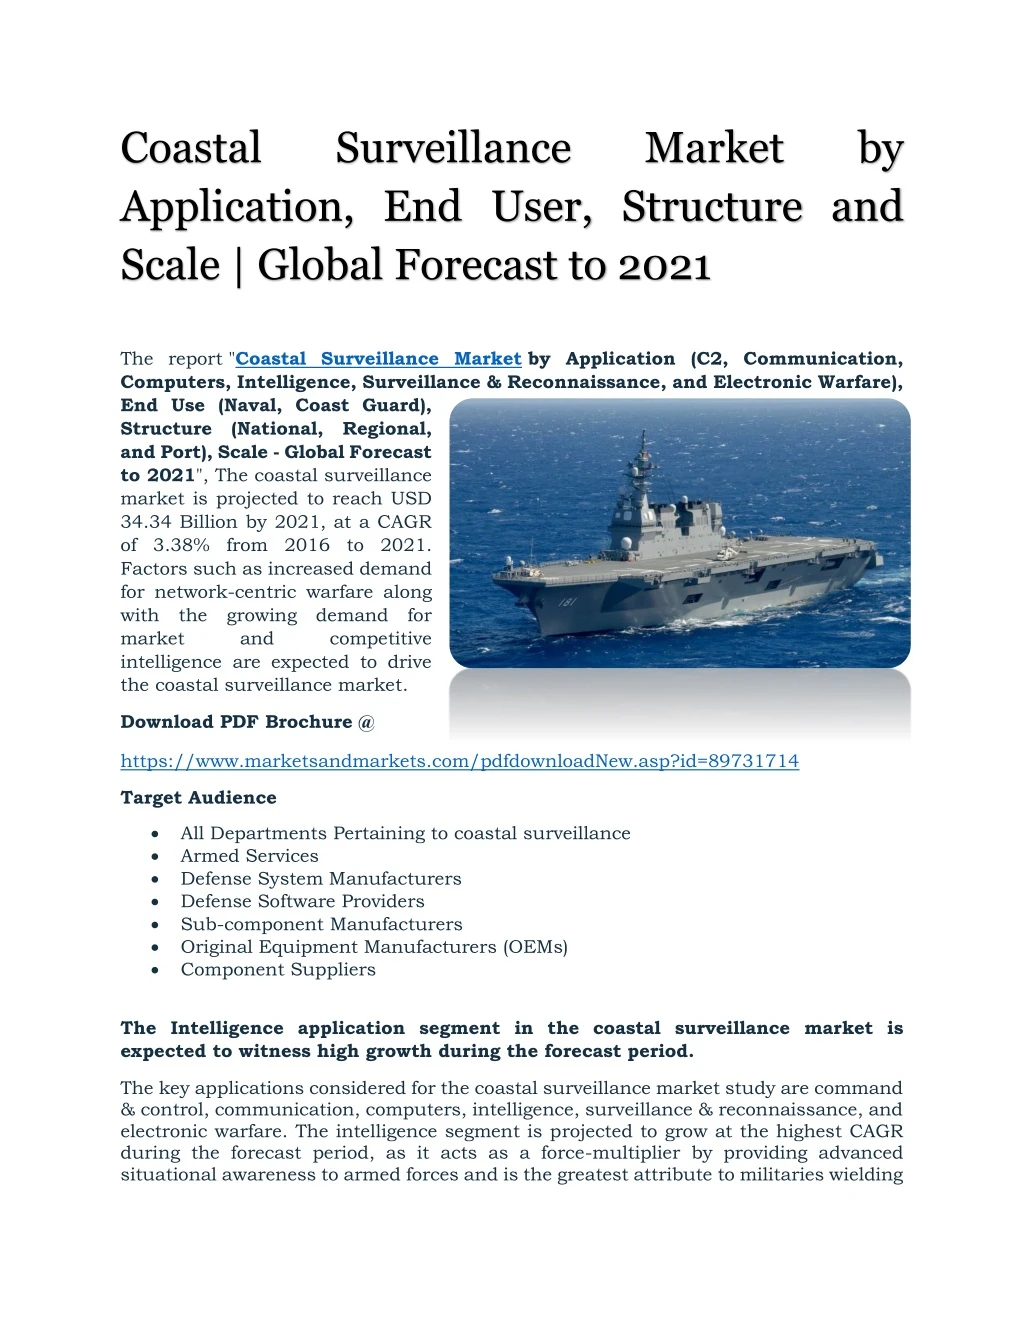 coastal application end user structure and scale